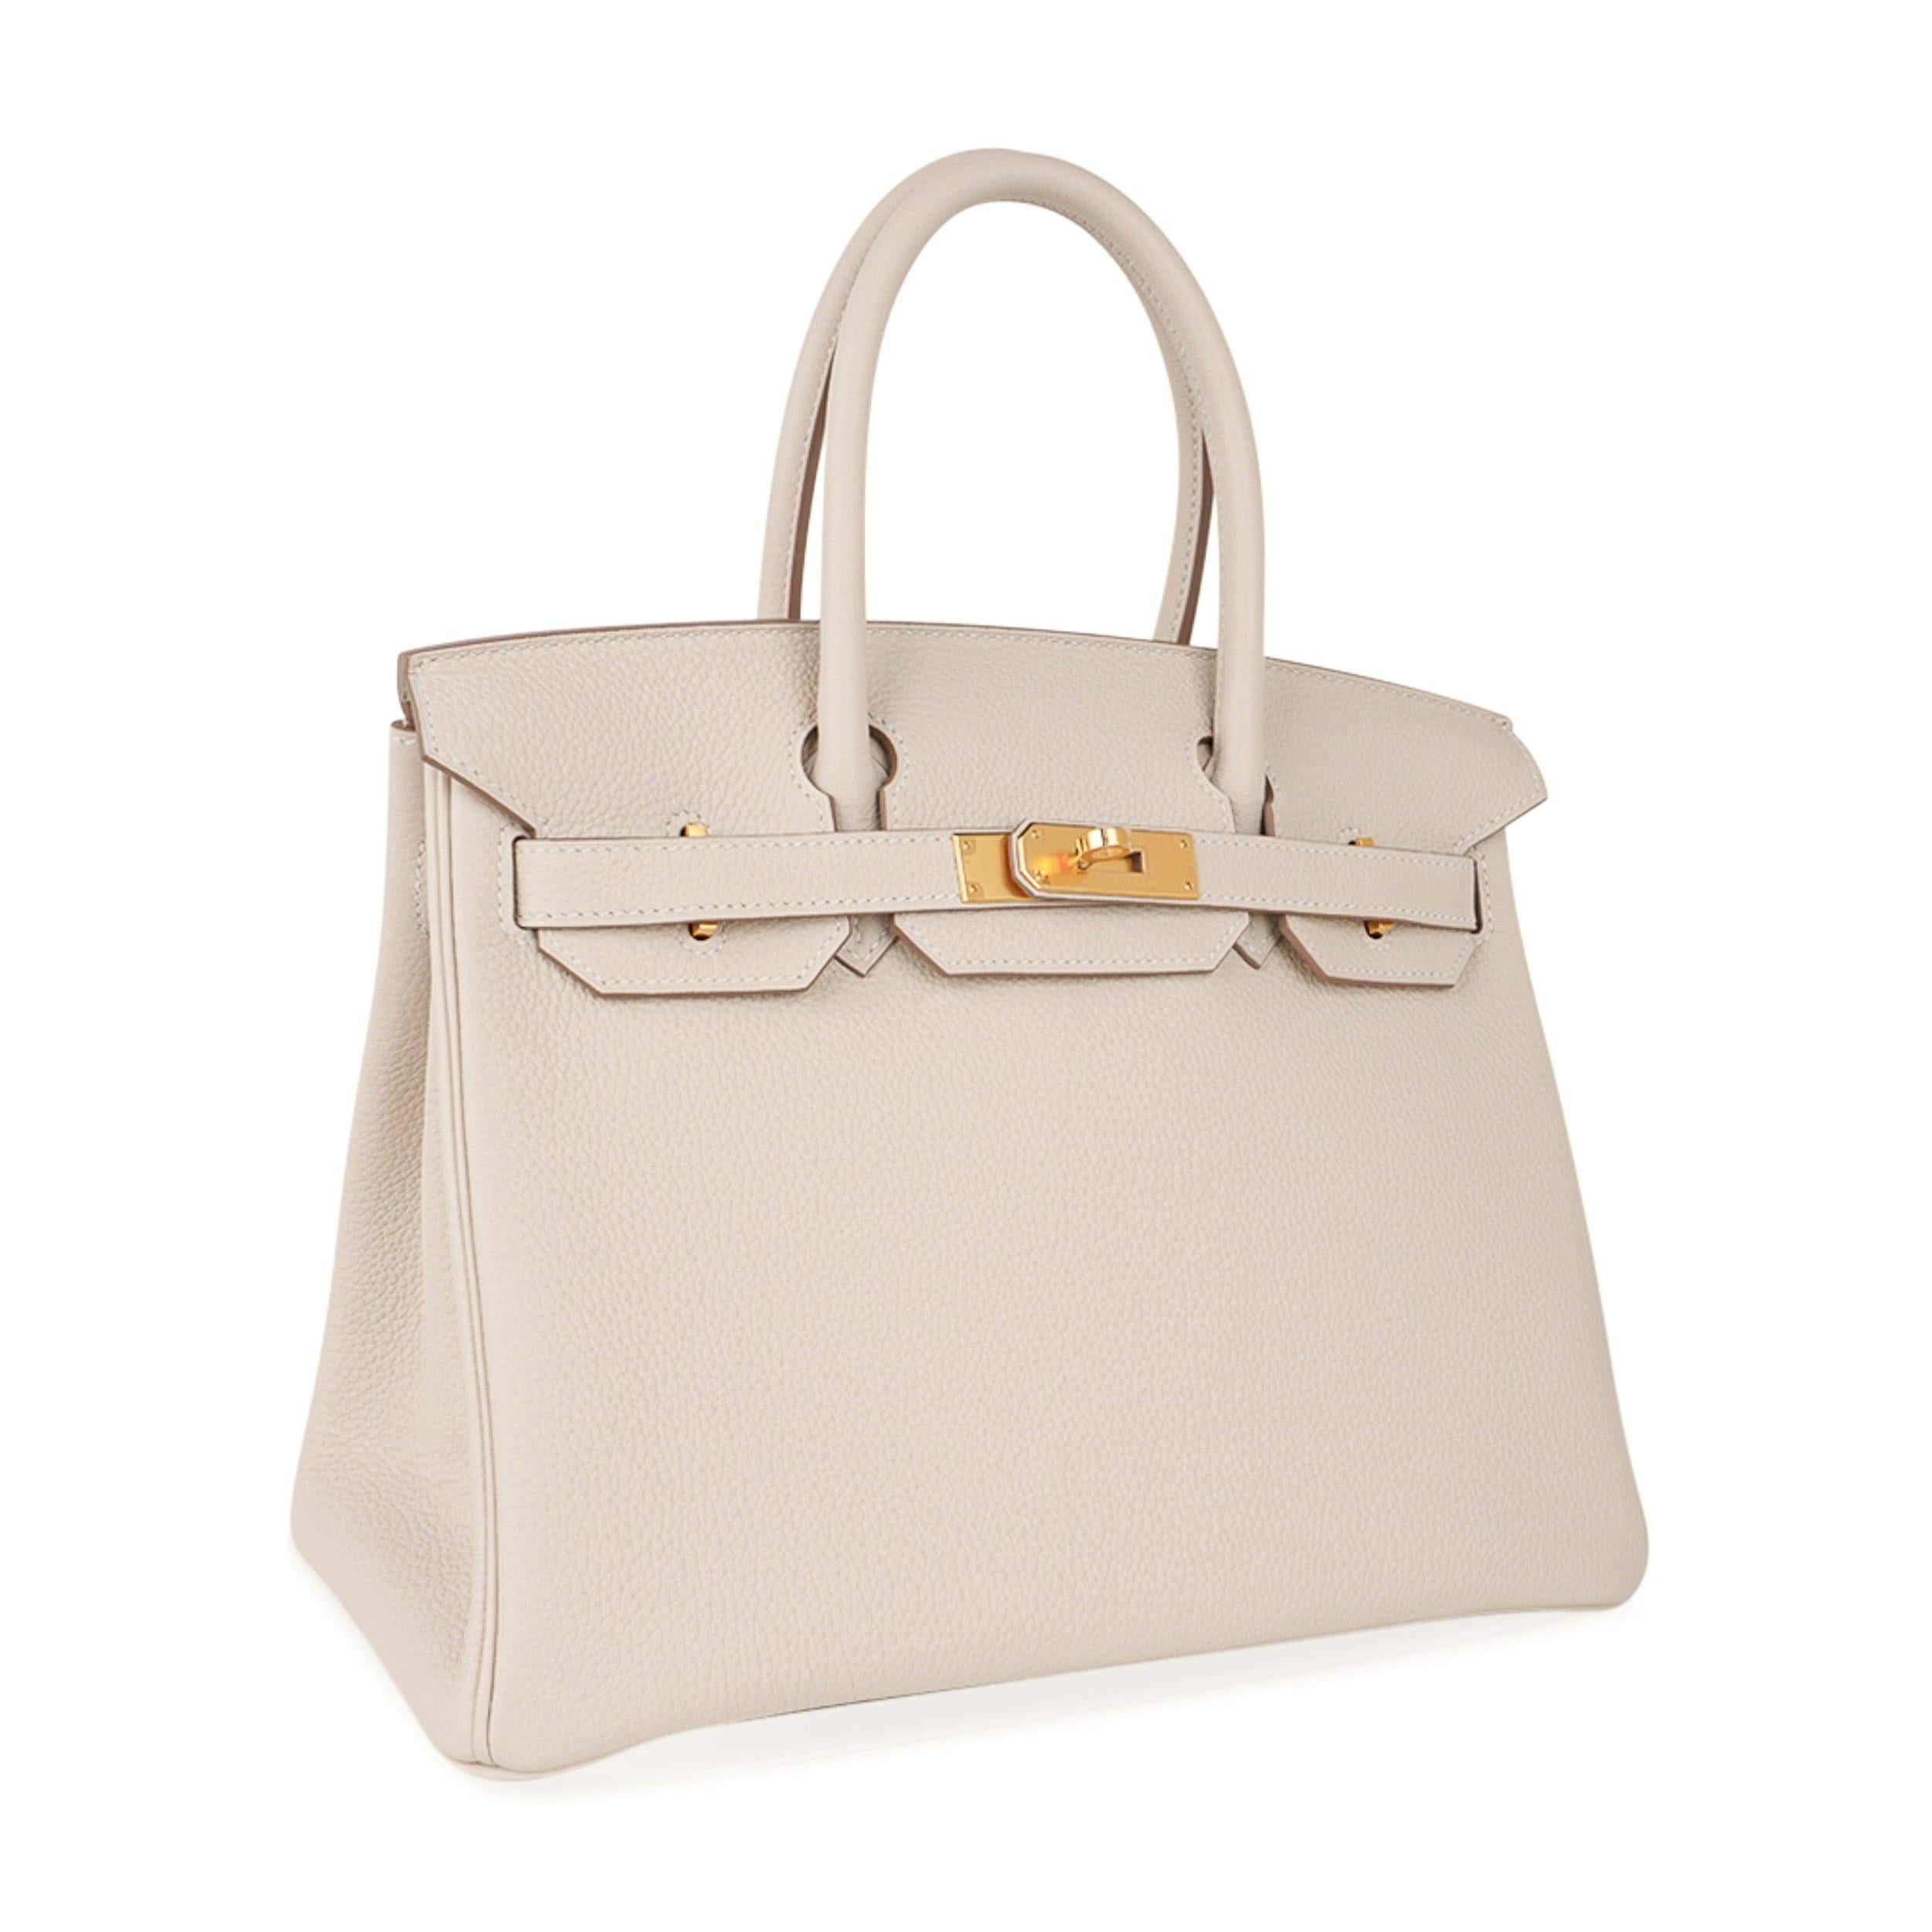 Mightychic offers an Hermes Birkin 30 bag featured in neutral Craie with Gold hardware.
This beautiful combination is timeless.
Togo leather is supple and scratch resistant.
Craie is one of the most in demand neutral colours and beloved by Hermes